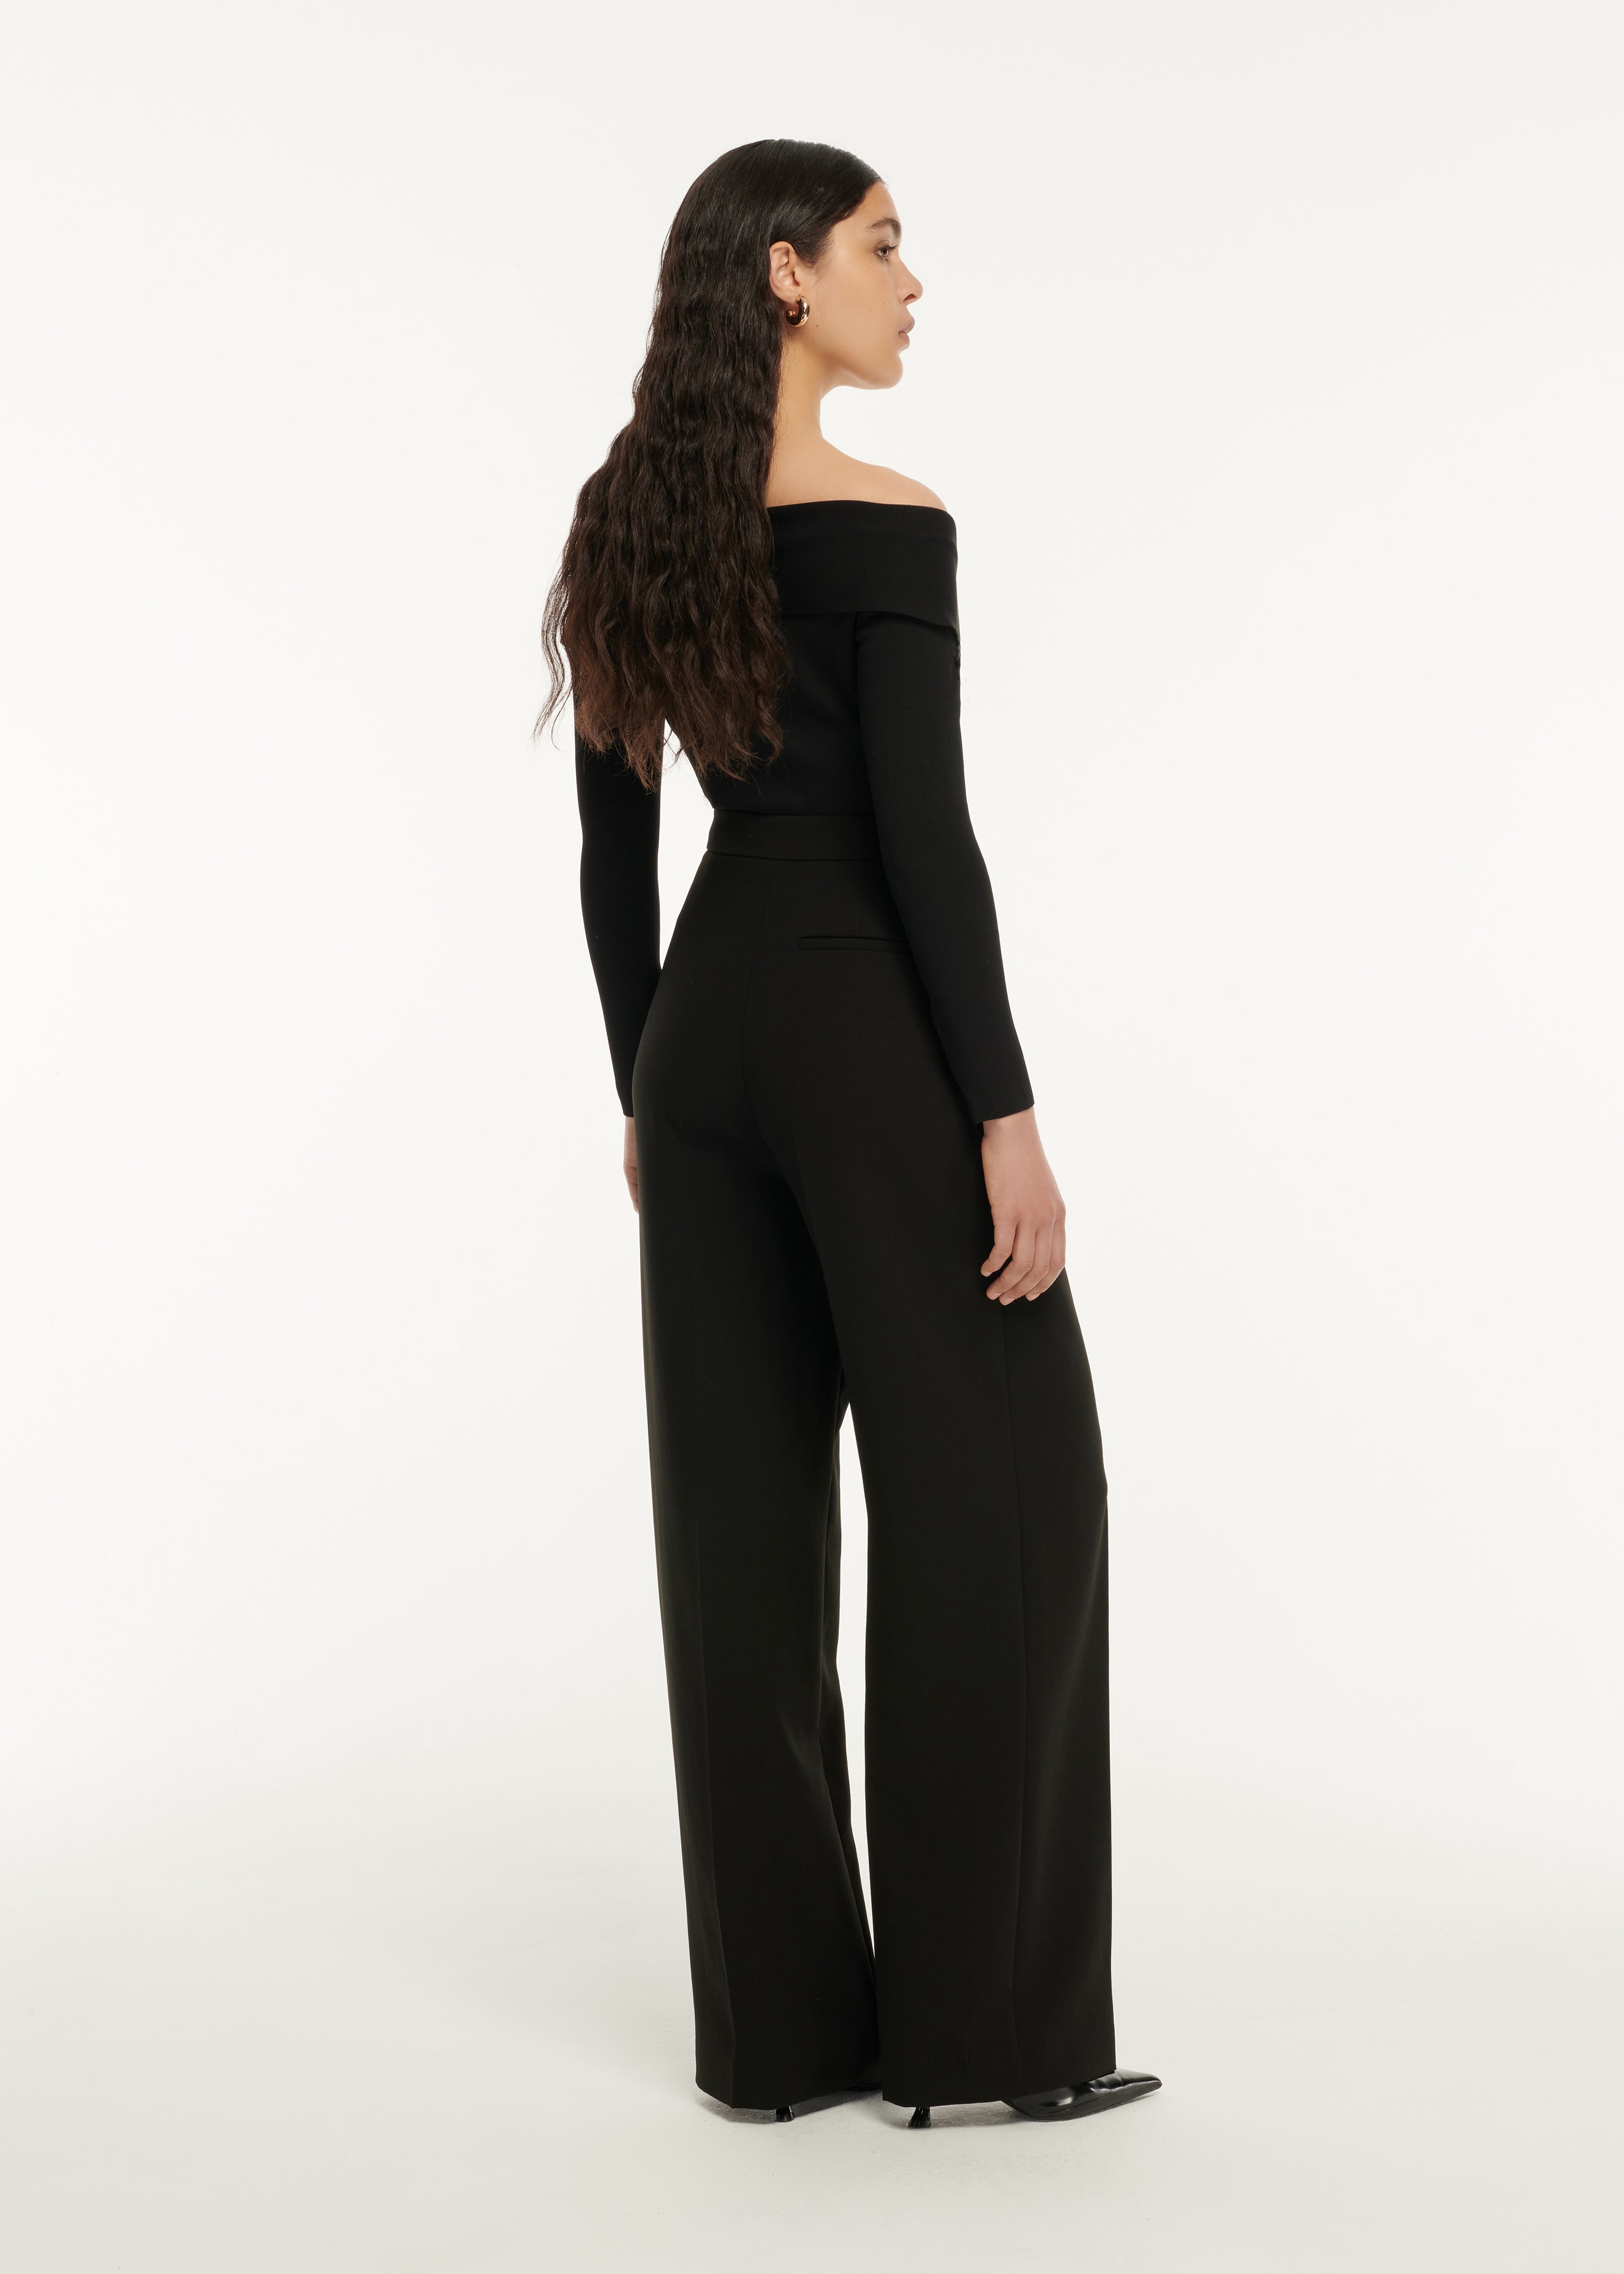 Balmain Jumpsuits & Playsuits for Women on sale - Best Prices in Philippines  - Philippines price | FASHIOLA